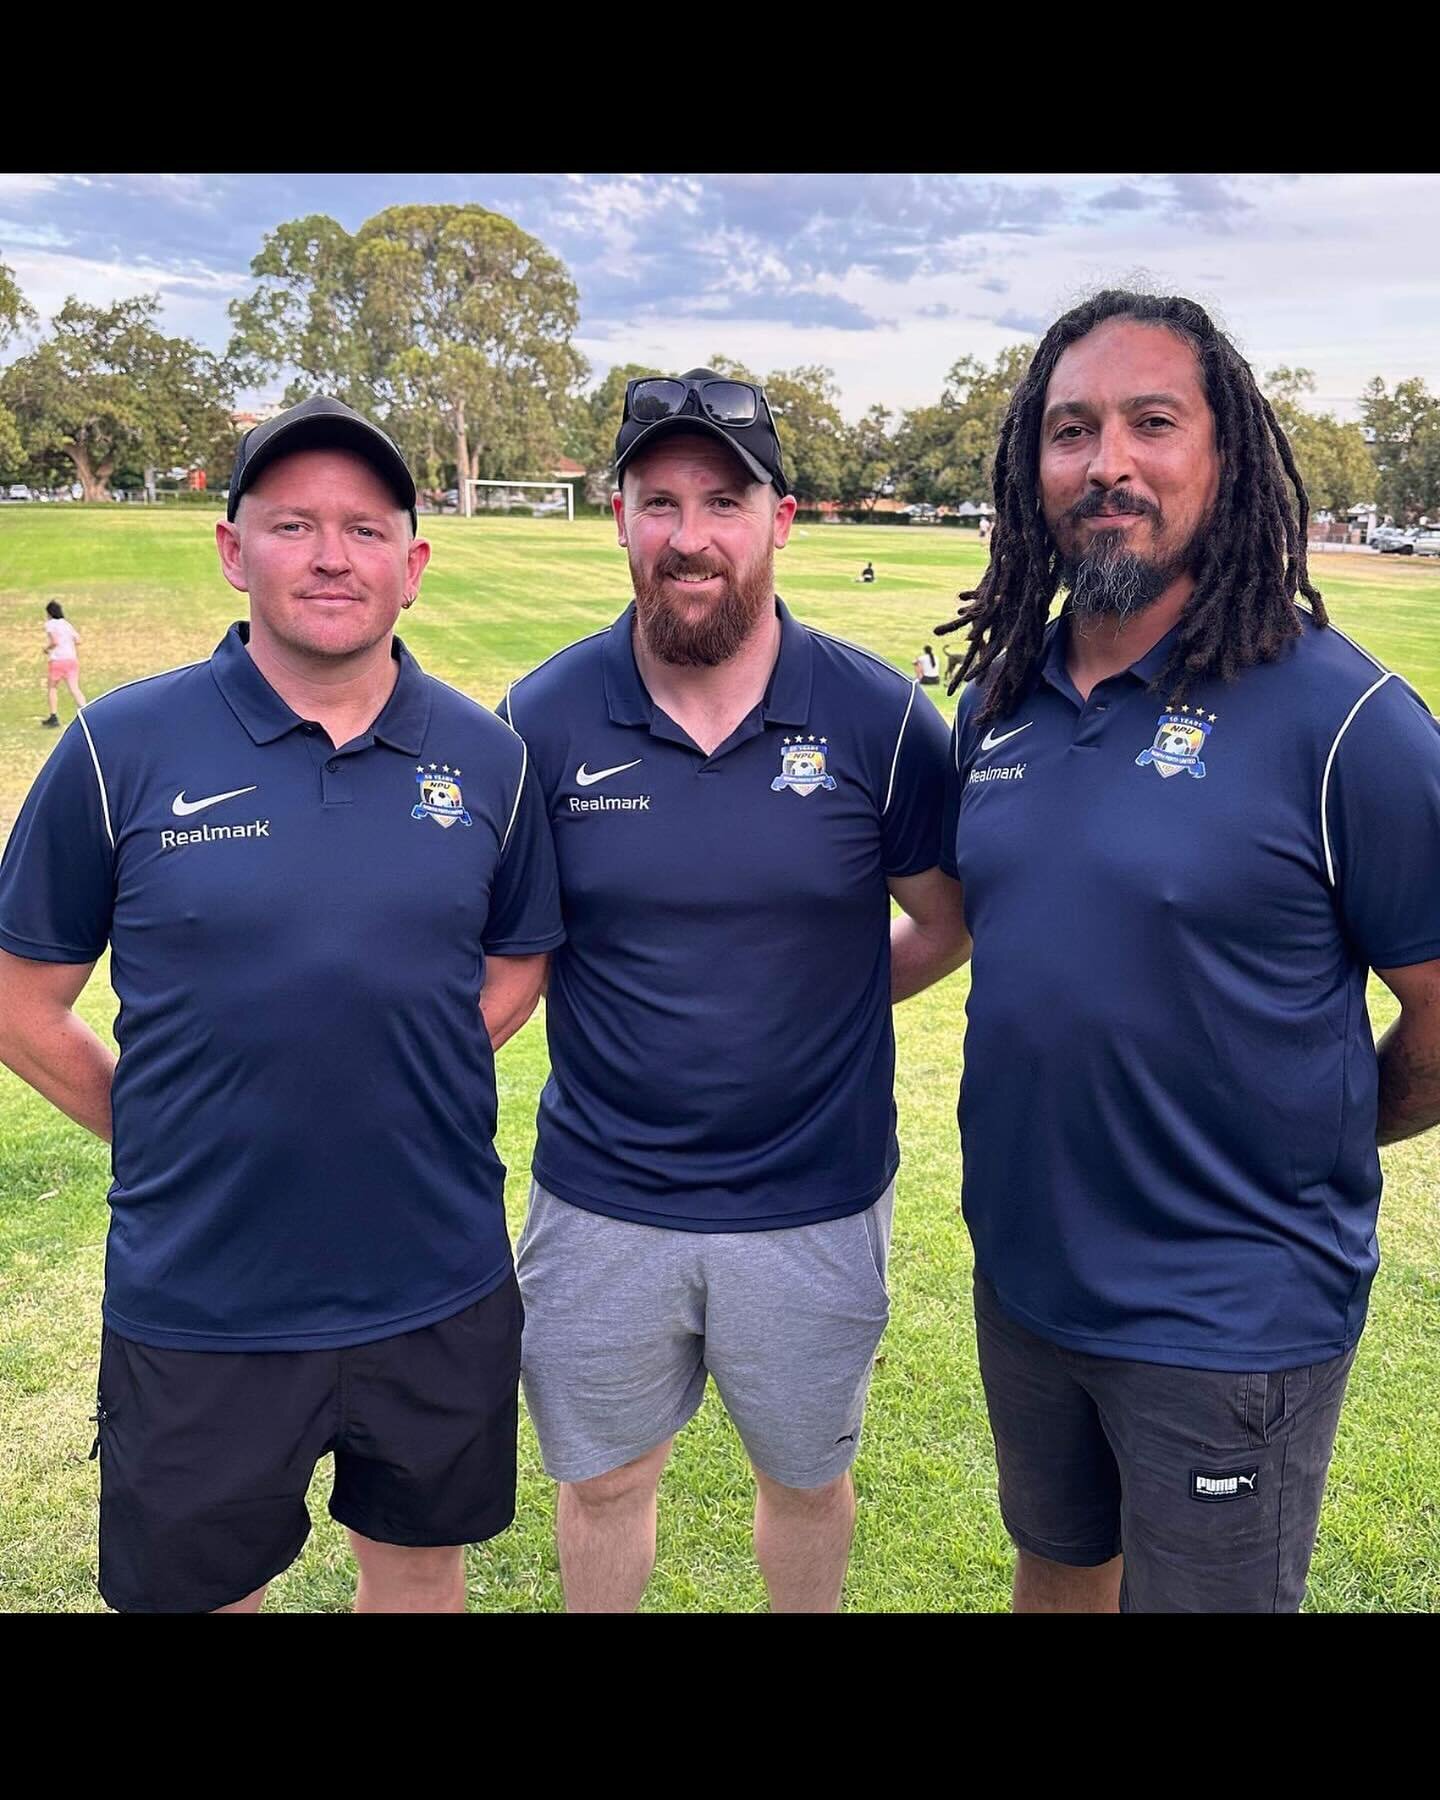 🎉 Welcoming our new coaching lineup at North Perth United! 🎉

👋 Join us in giving a warm welcome to Shane Nunez, our newest addition to the coaching staff! ⚽ With a rich history playing in both Western Australia and Melbourne, Shane brings invalua